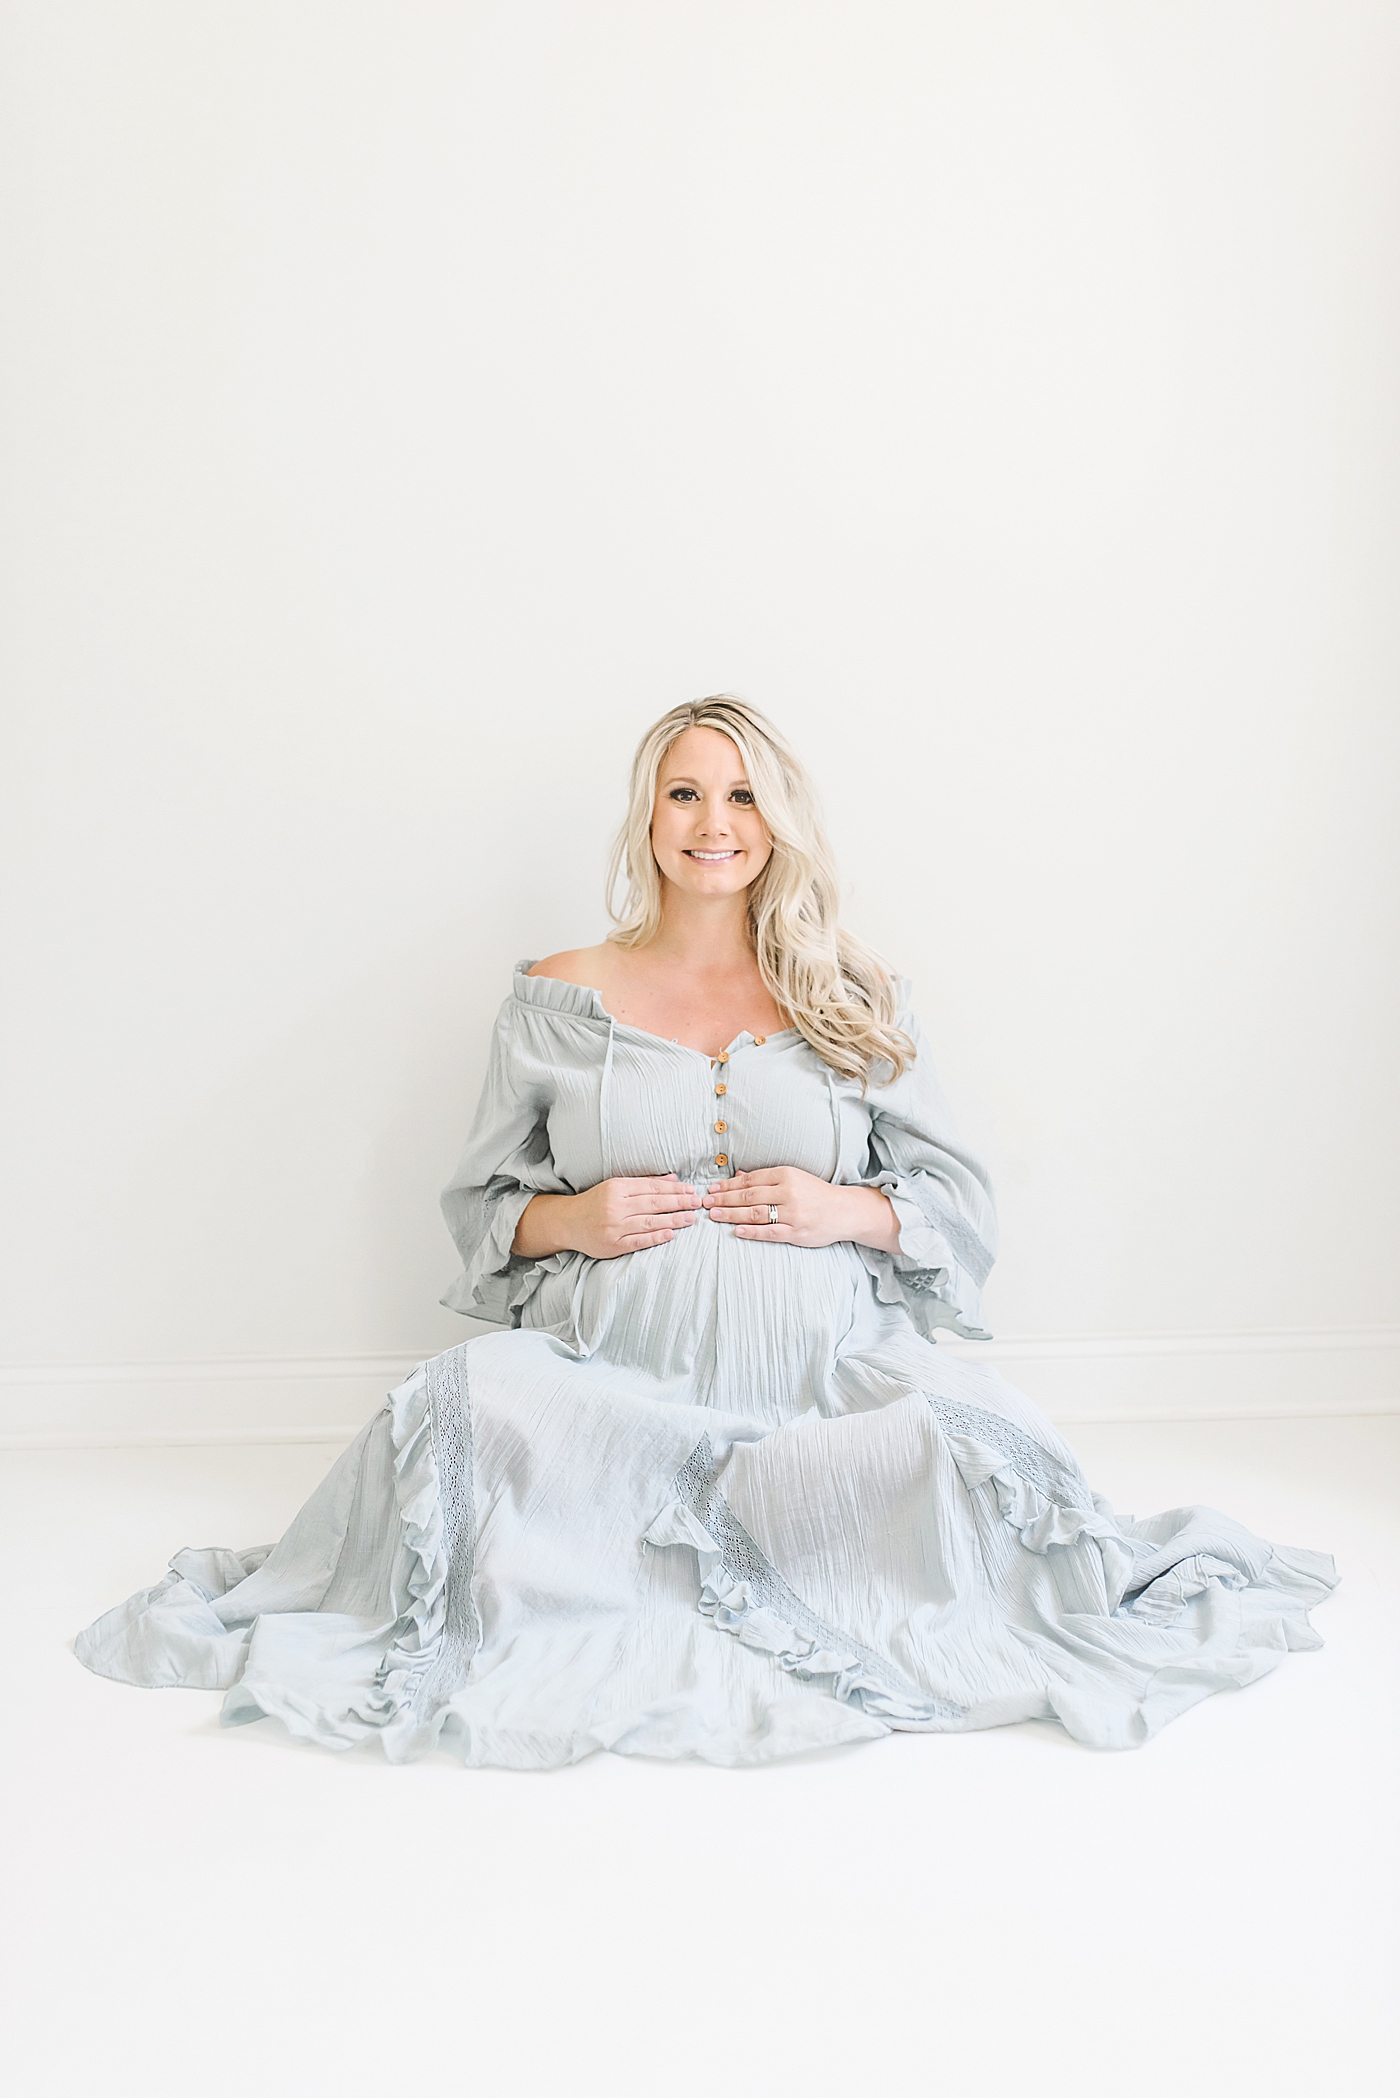 Mother to be in blue dress | Photo by Huntersville Newborn Photographer Anna Wisjo